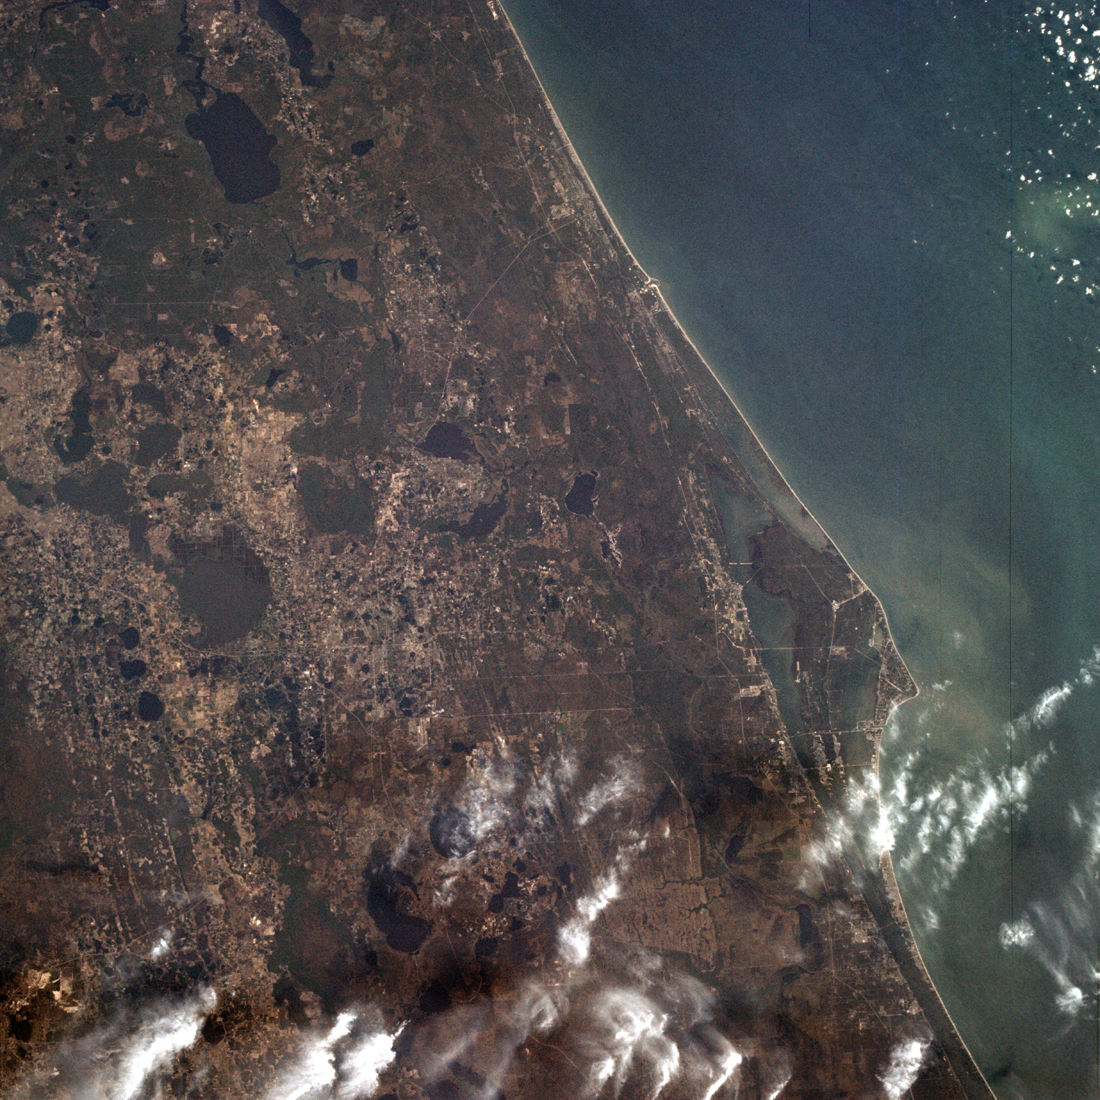 Cape Kennedy and Kennedy Space Center photographed by Apollo 9 astronauts as part of Experiment S065.